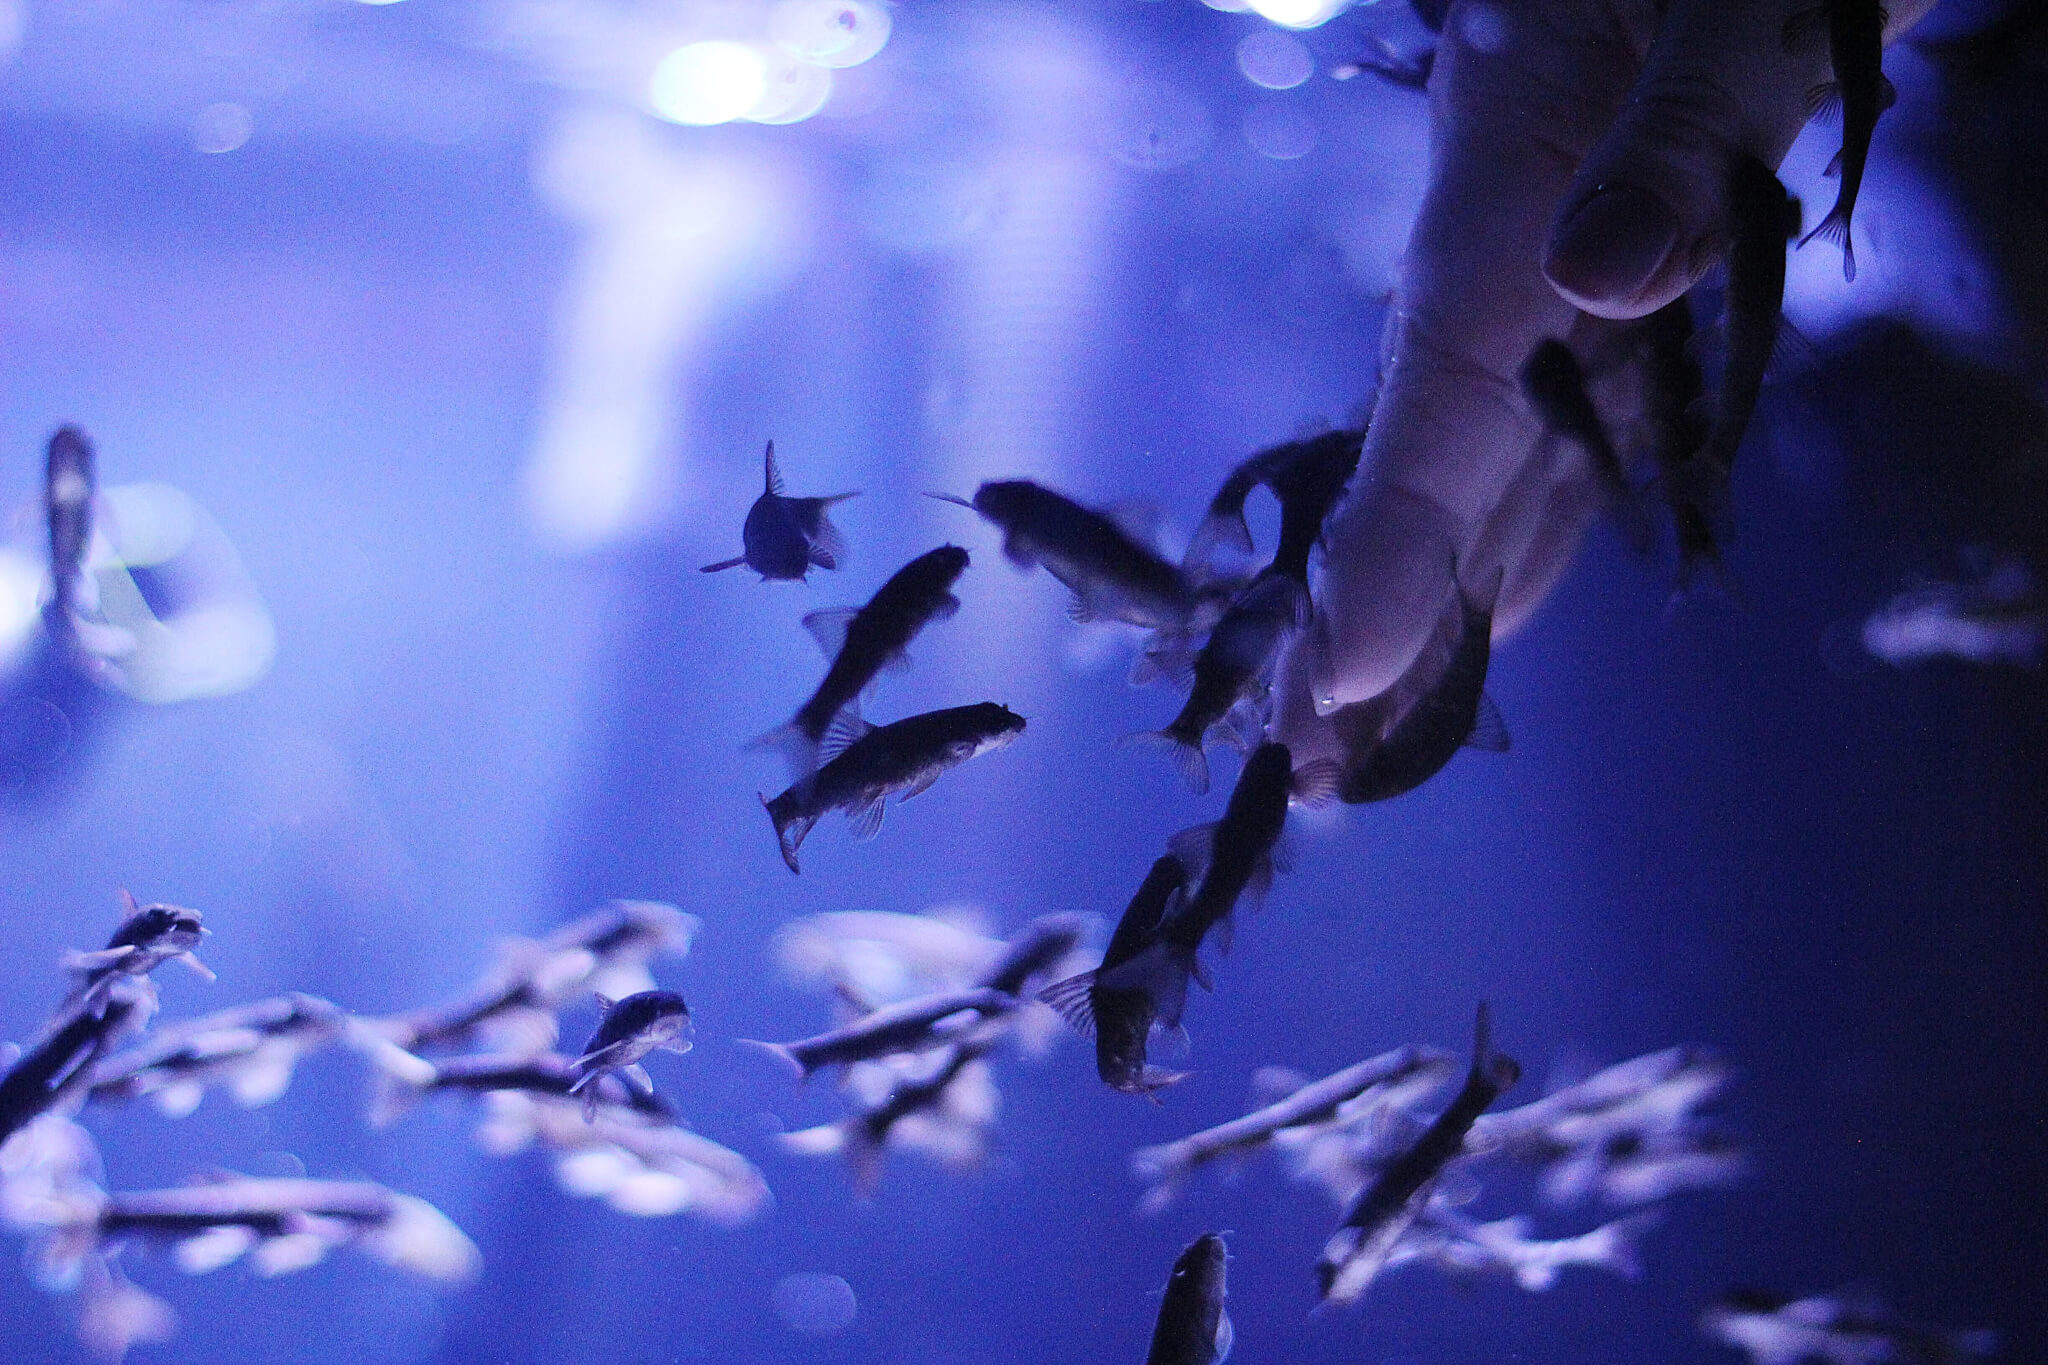 You can touch almost anything at the East Idaho Aquarium